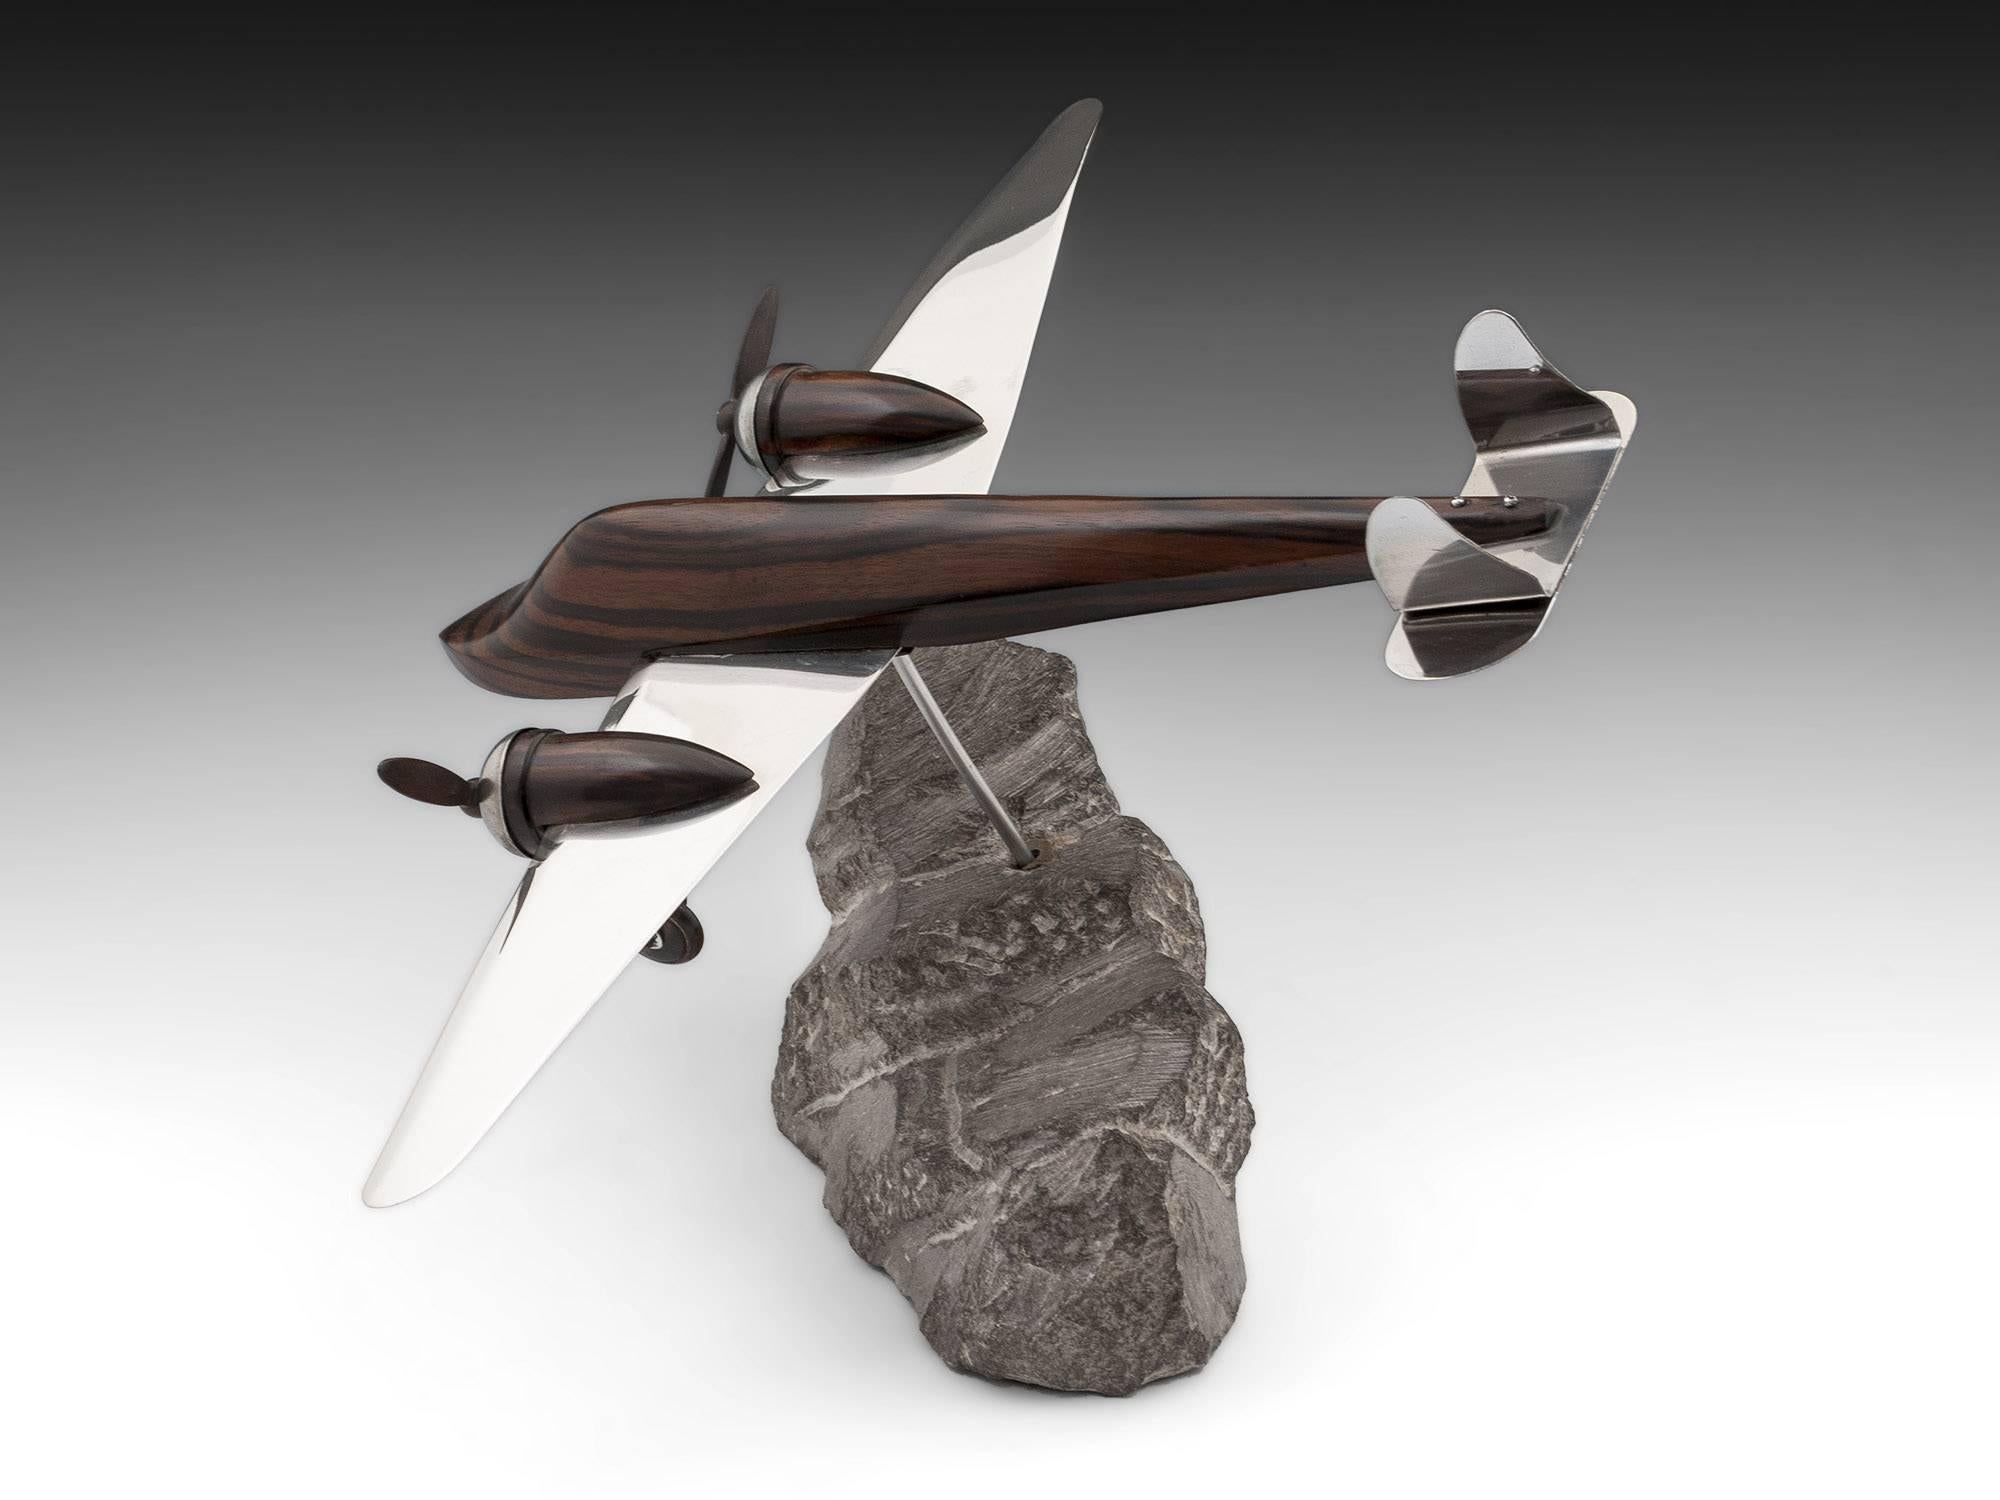 Art Deco Model of an aeroplane made with solid Macassar ebony and silver plated brass. The propellers and landing gear are made of Macassar ebony and both turn. 

Standing on a stone plinth which the plane can swivel on.